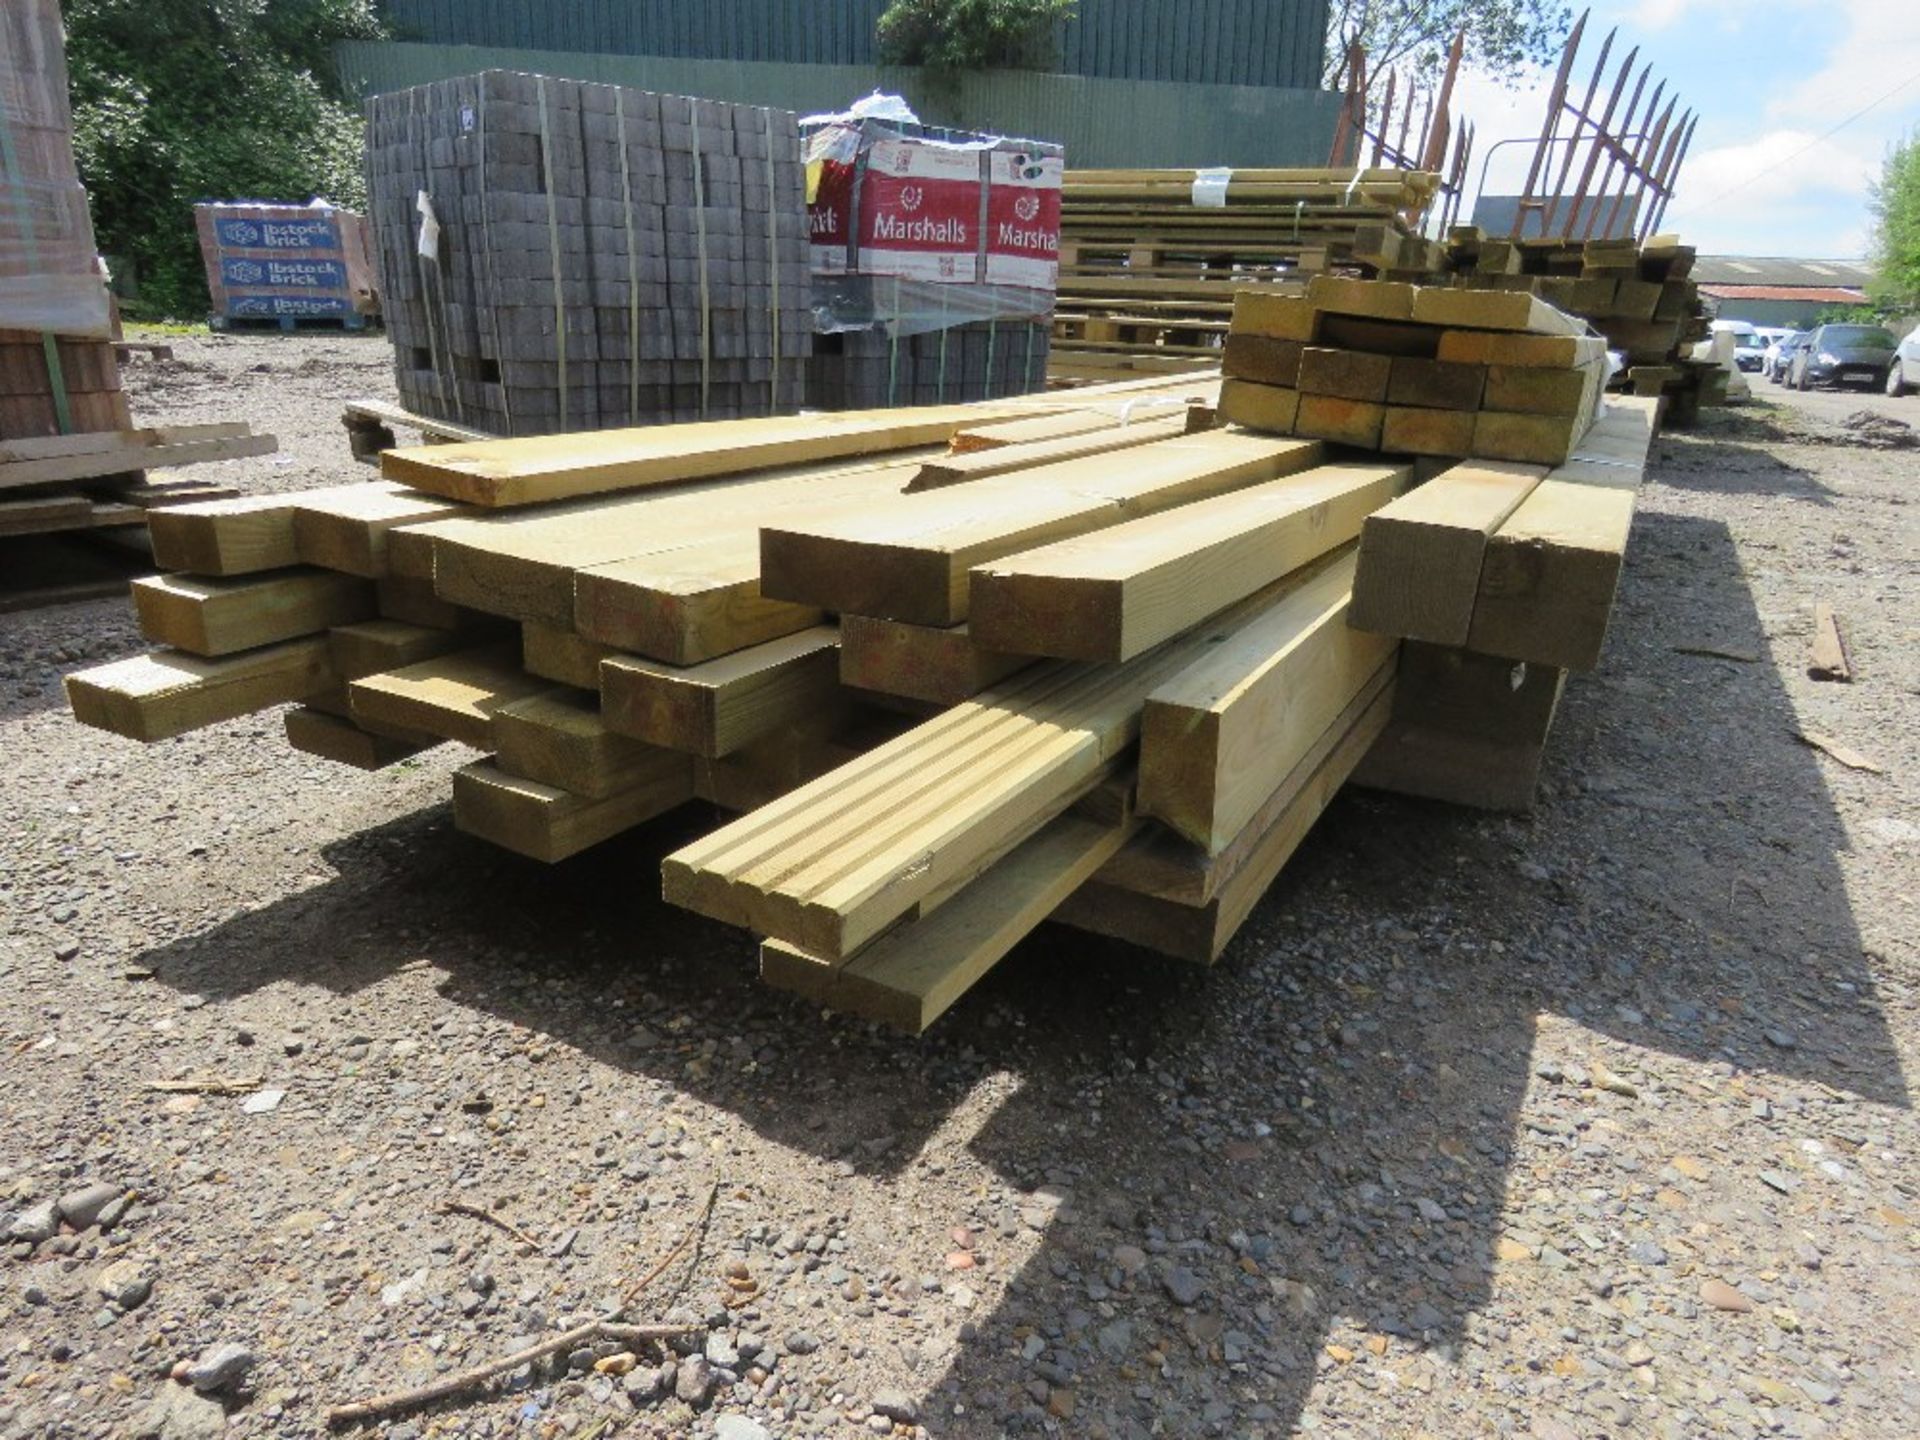 2 X BUNDLES OF TREATED FENCING TIMBERS, POSTS AND BOARDS AS SHOWN, 5-12FT LENGTH APPROX.